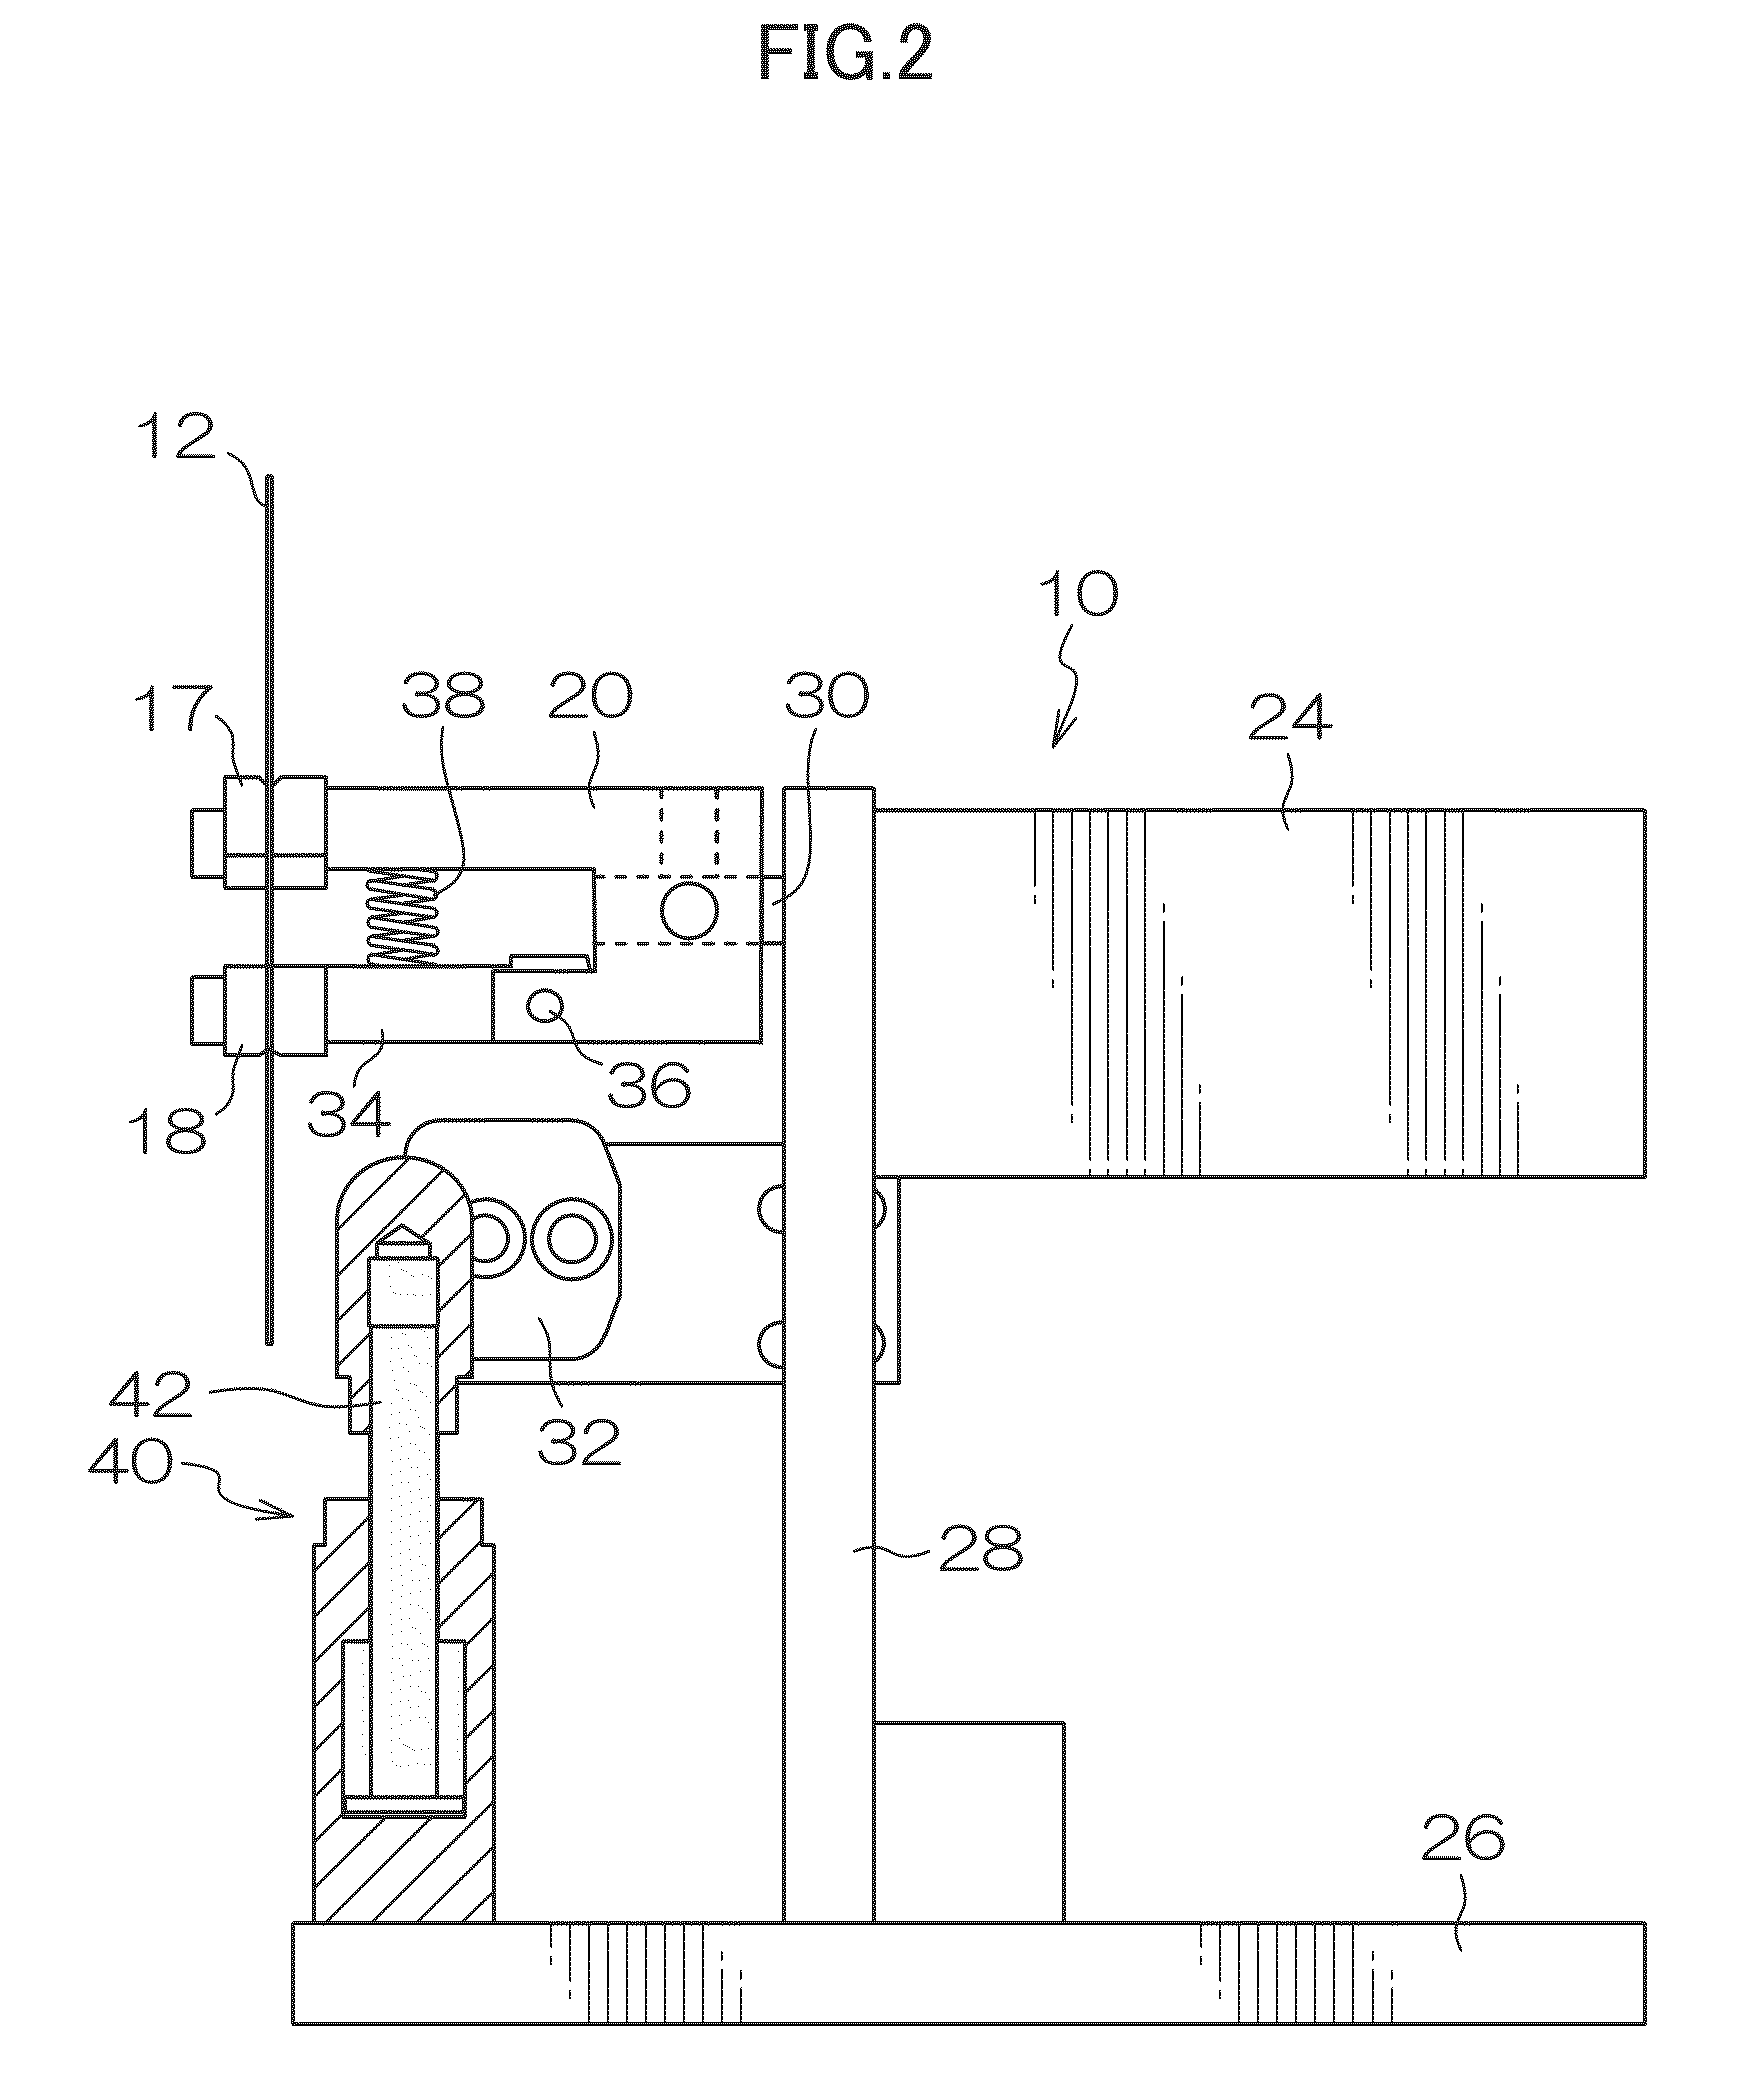 Hard disk inspection apparatus and method, as well as program